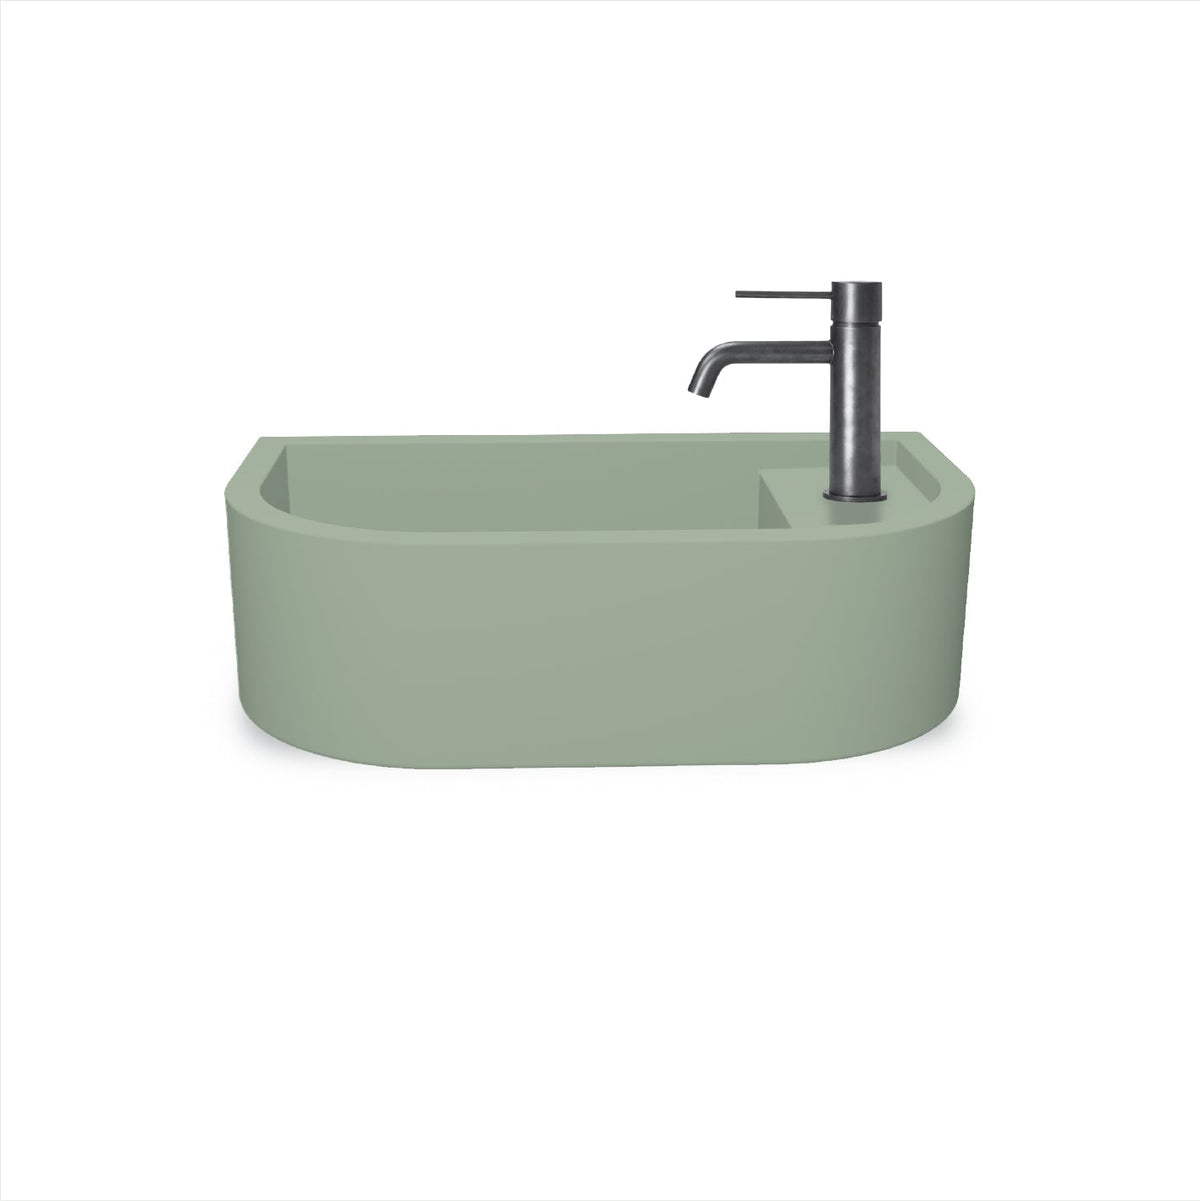 Loop 01 Basin - Overflow - Wall Hung (Mint,Tap Hole,White)